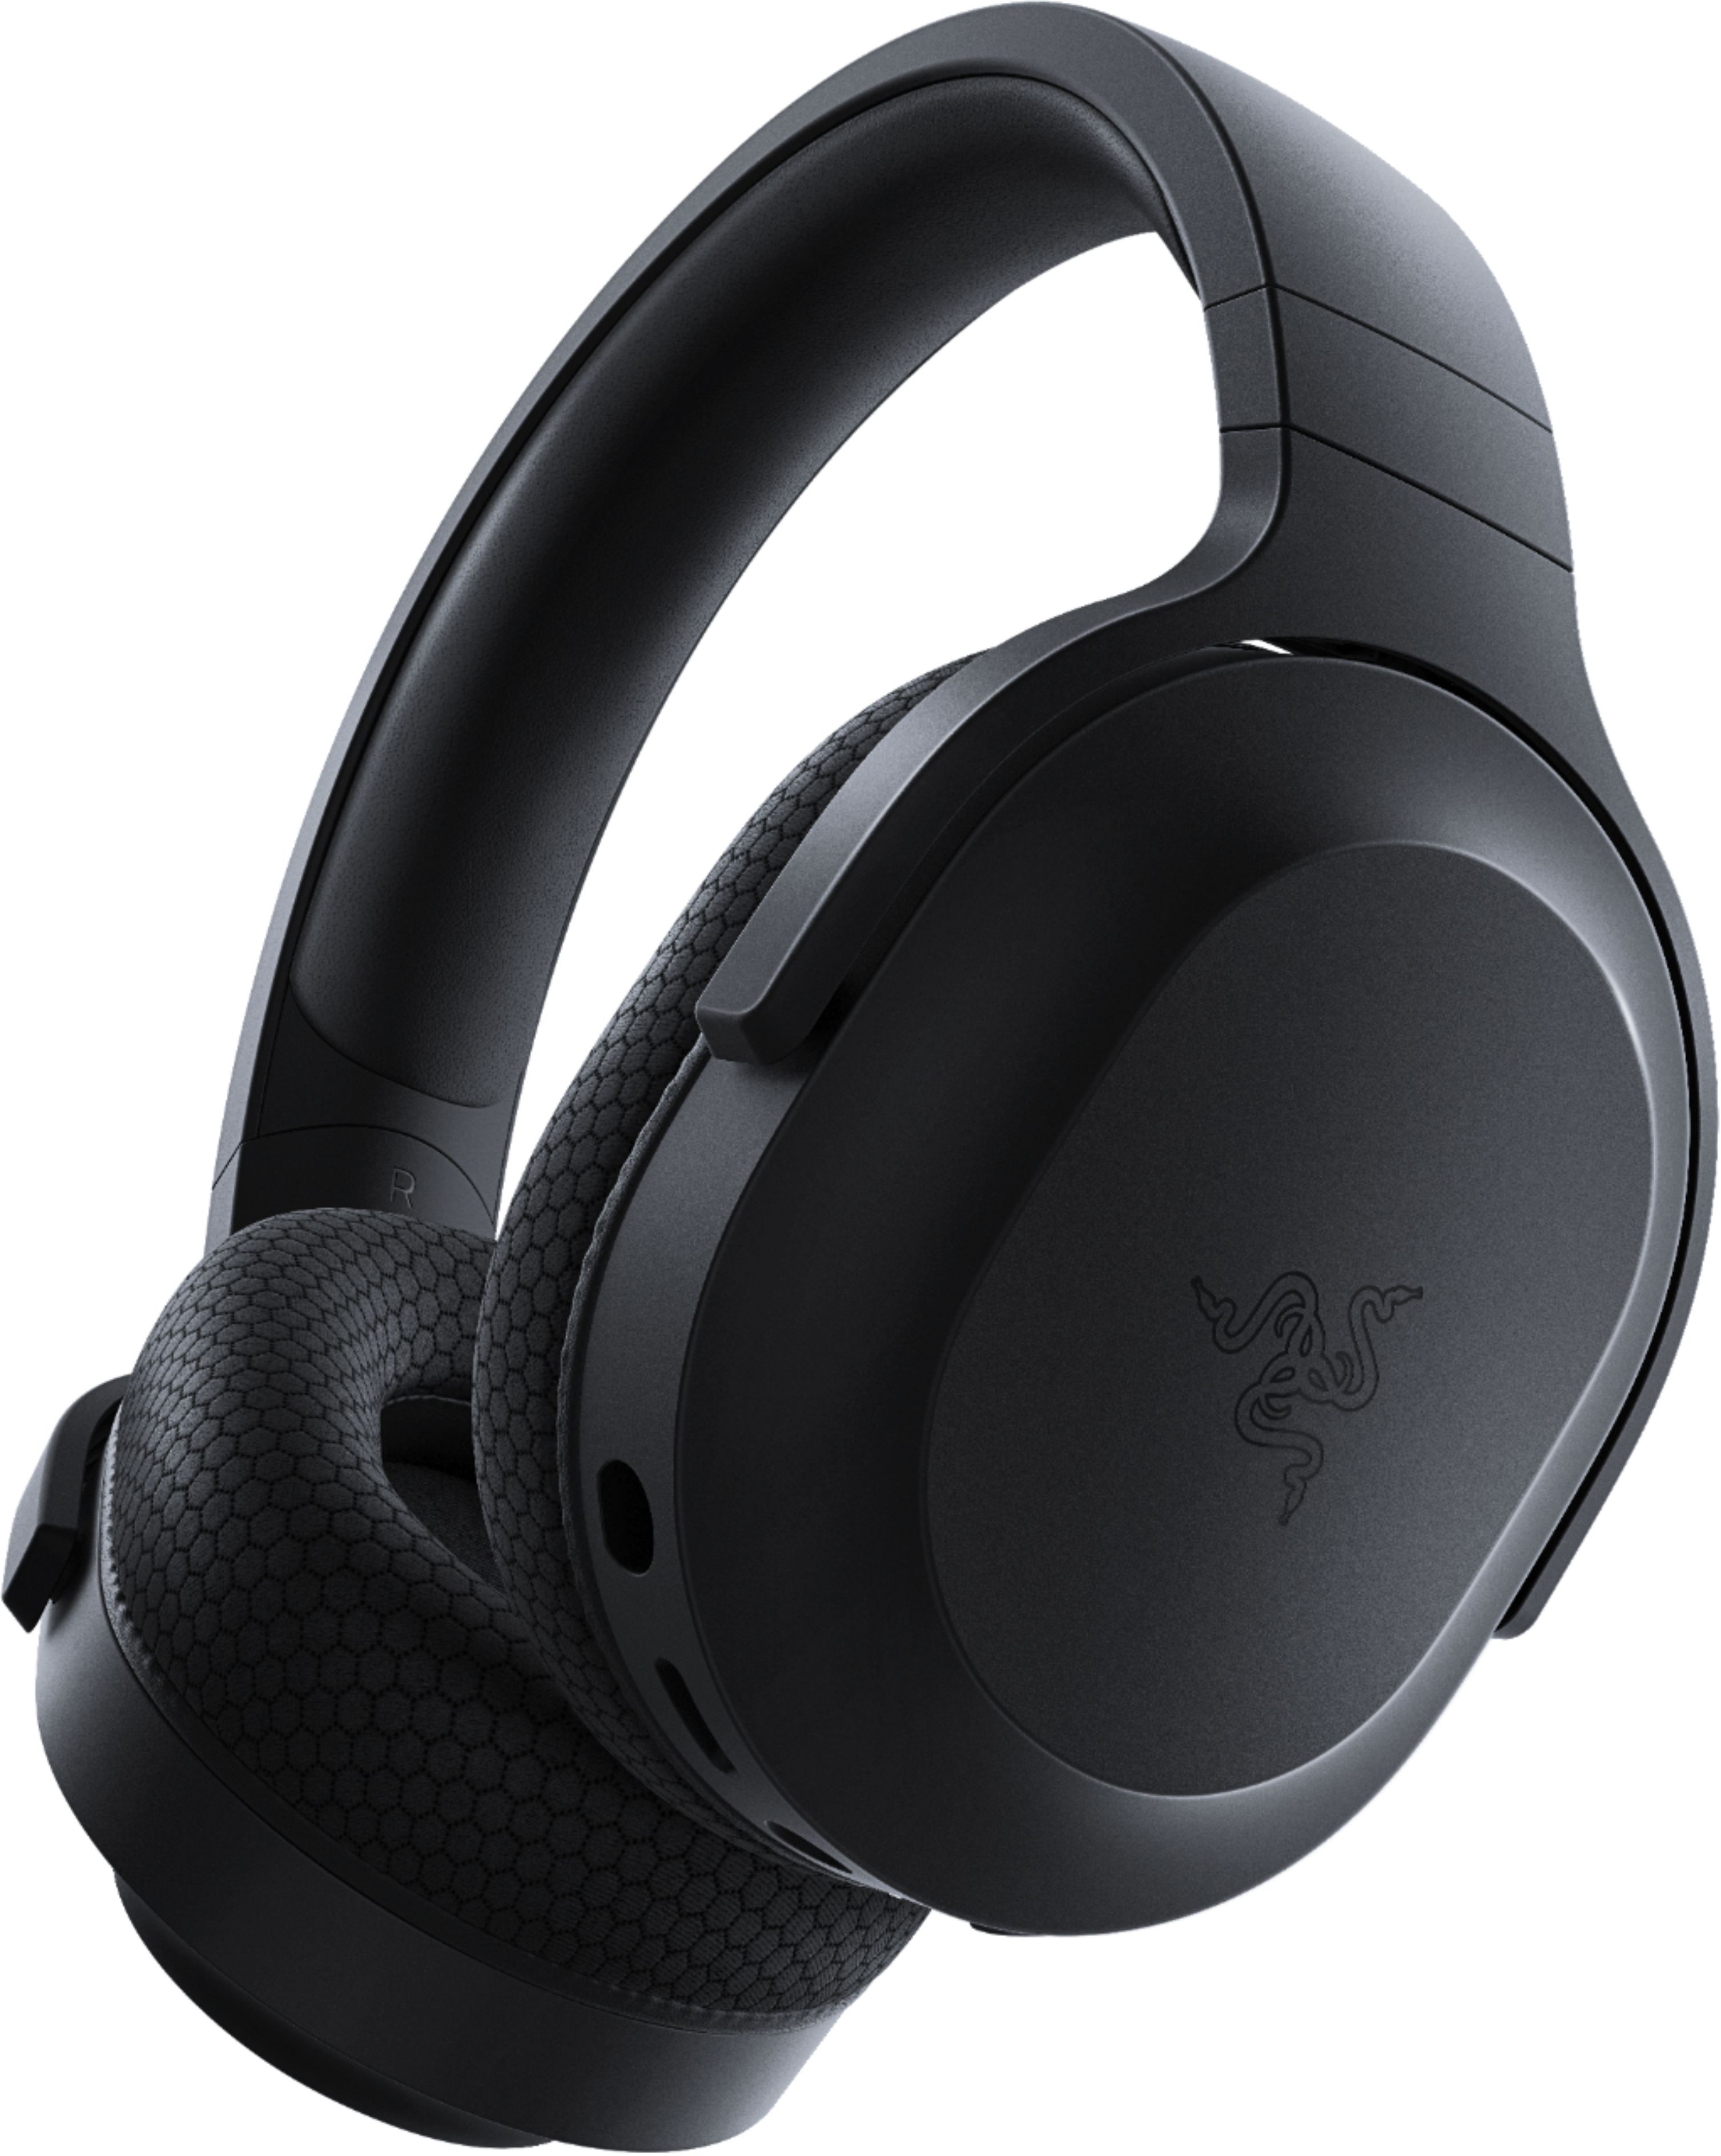 Razer - Barracuda X Wireless Stereo Gaming Headset for PC, PS4, PS5,  Switch, and Android - Black